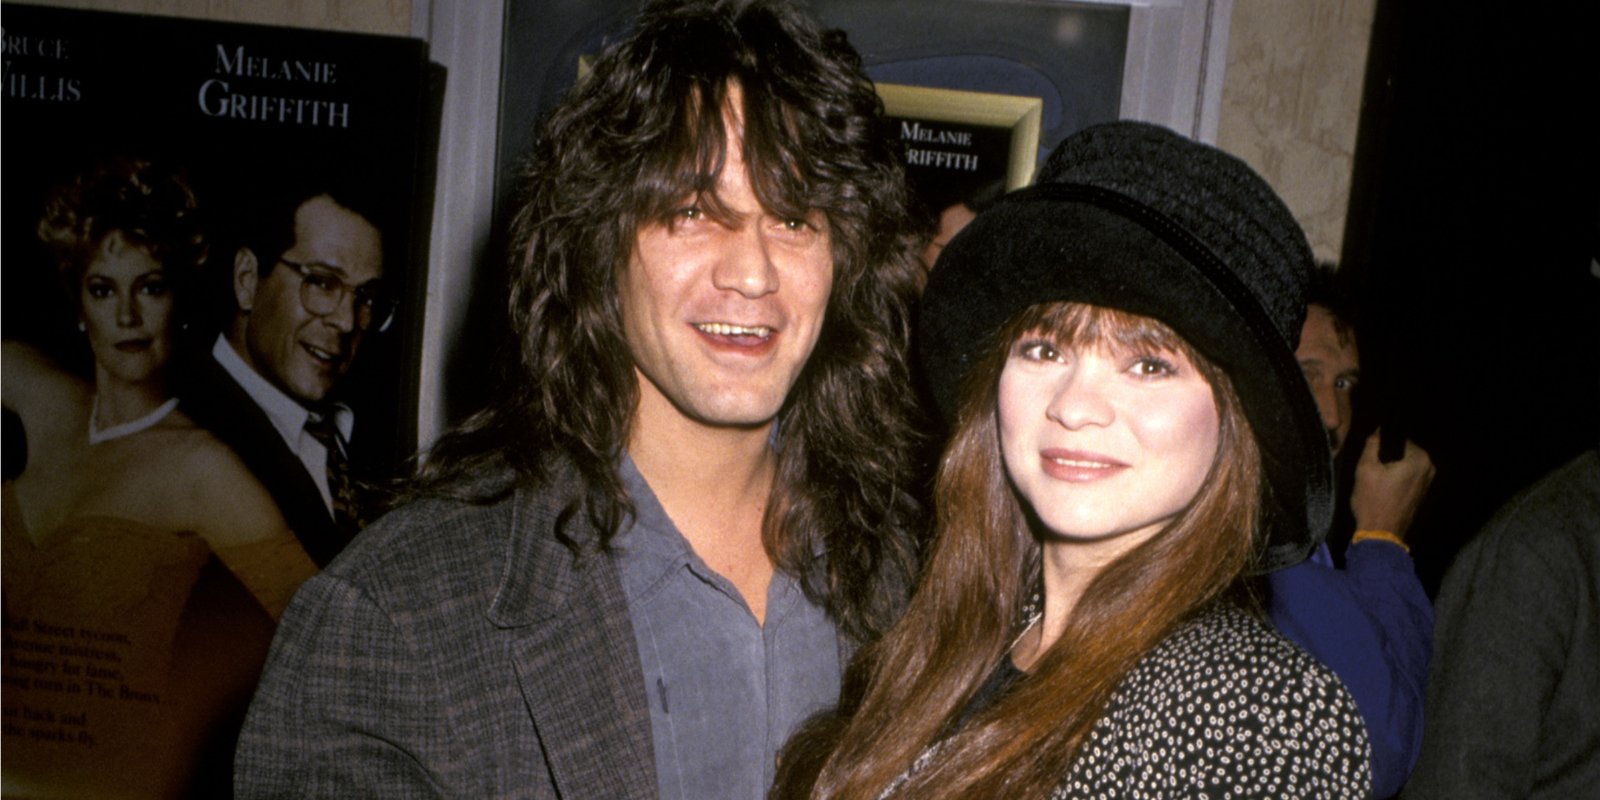 Eddie Van Halen and Valerie Bertinelli pose together at a red carpet event in 1990.